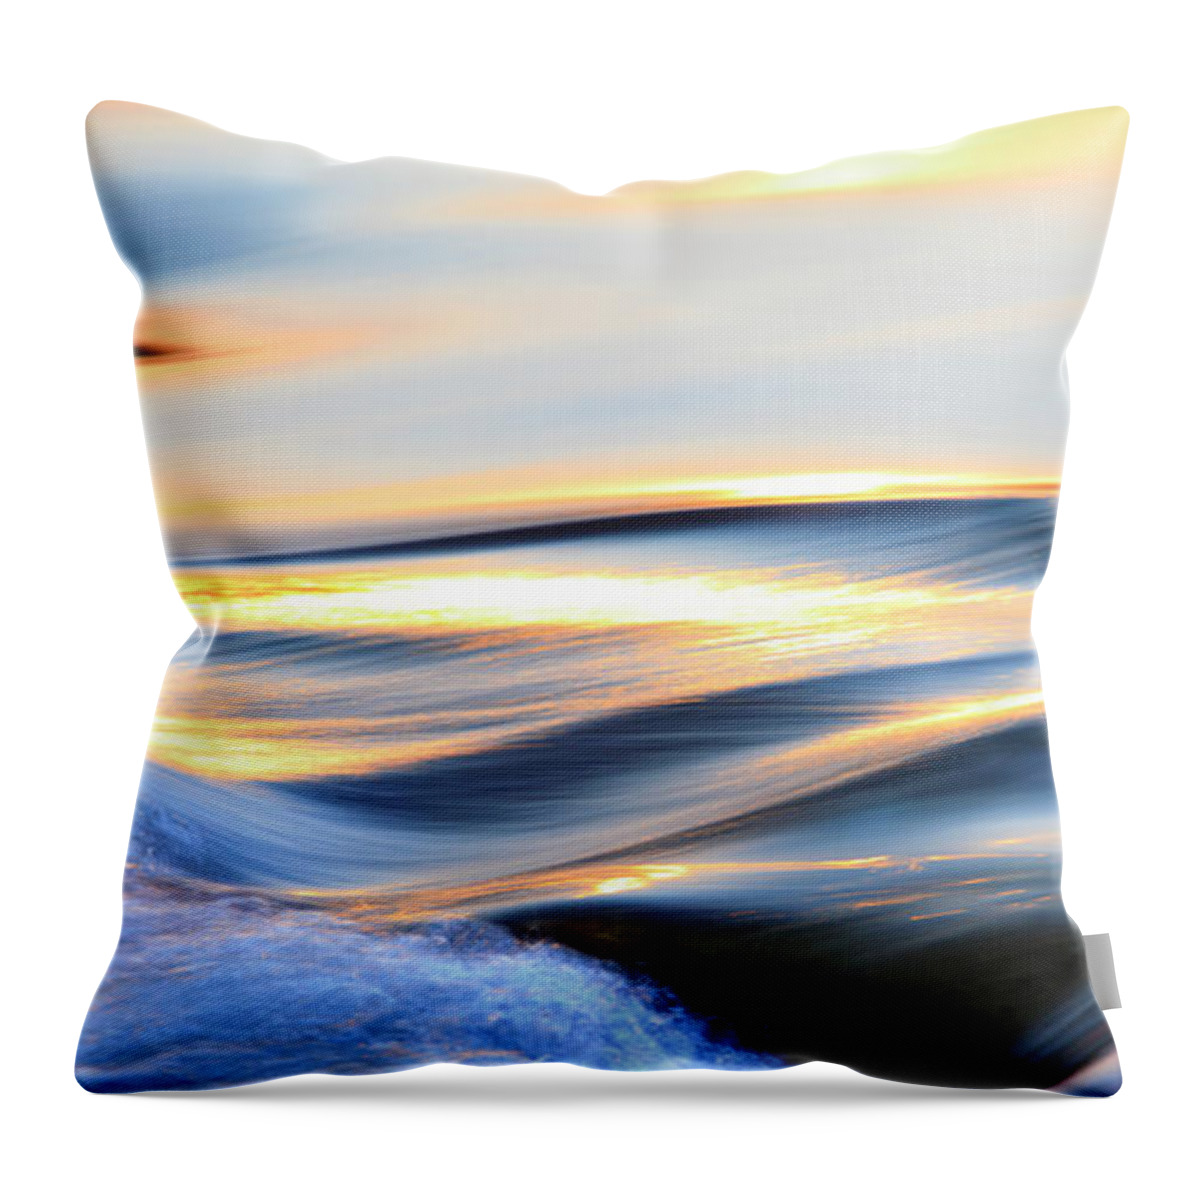 Dawn Throw Pillow featuring the photograph Colorful Flowing Water by Bihaibo